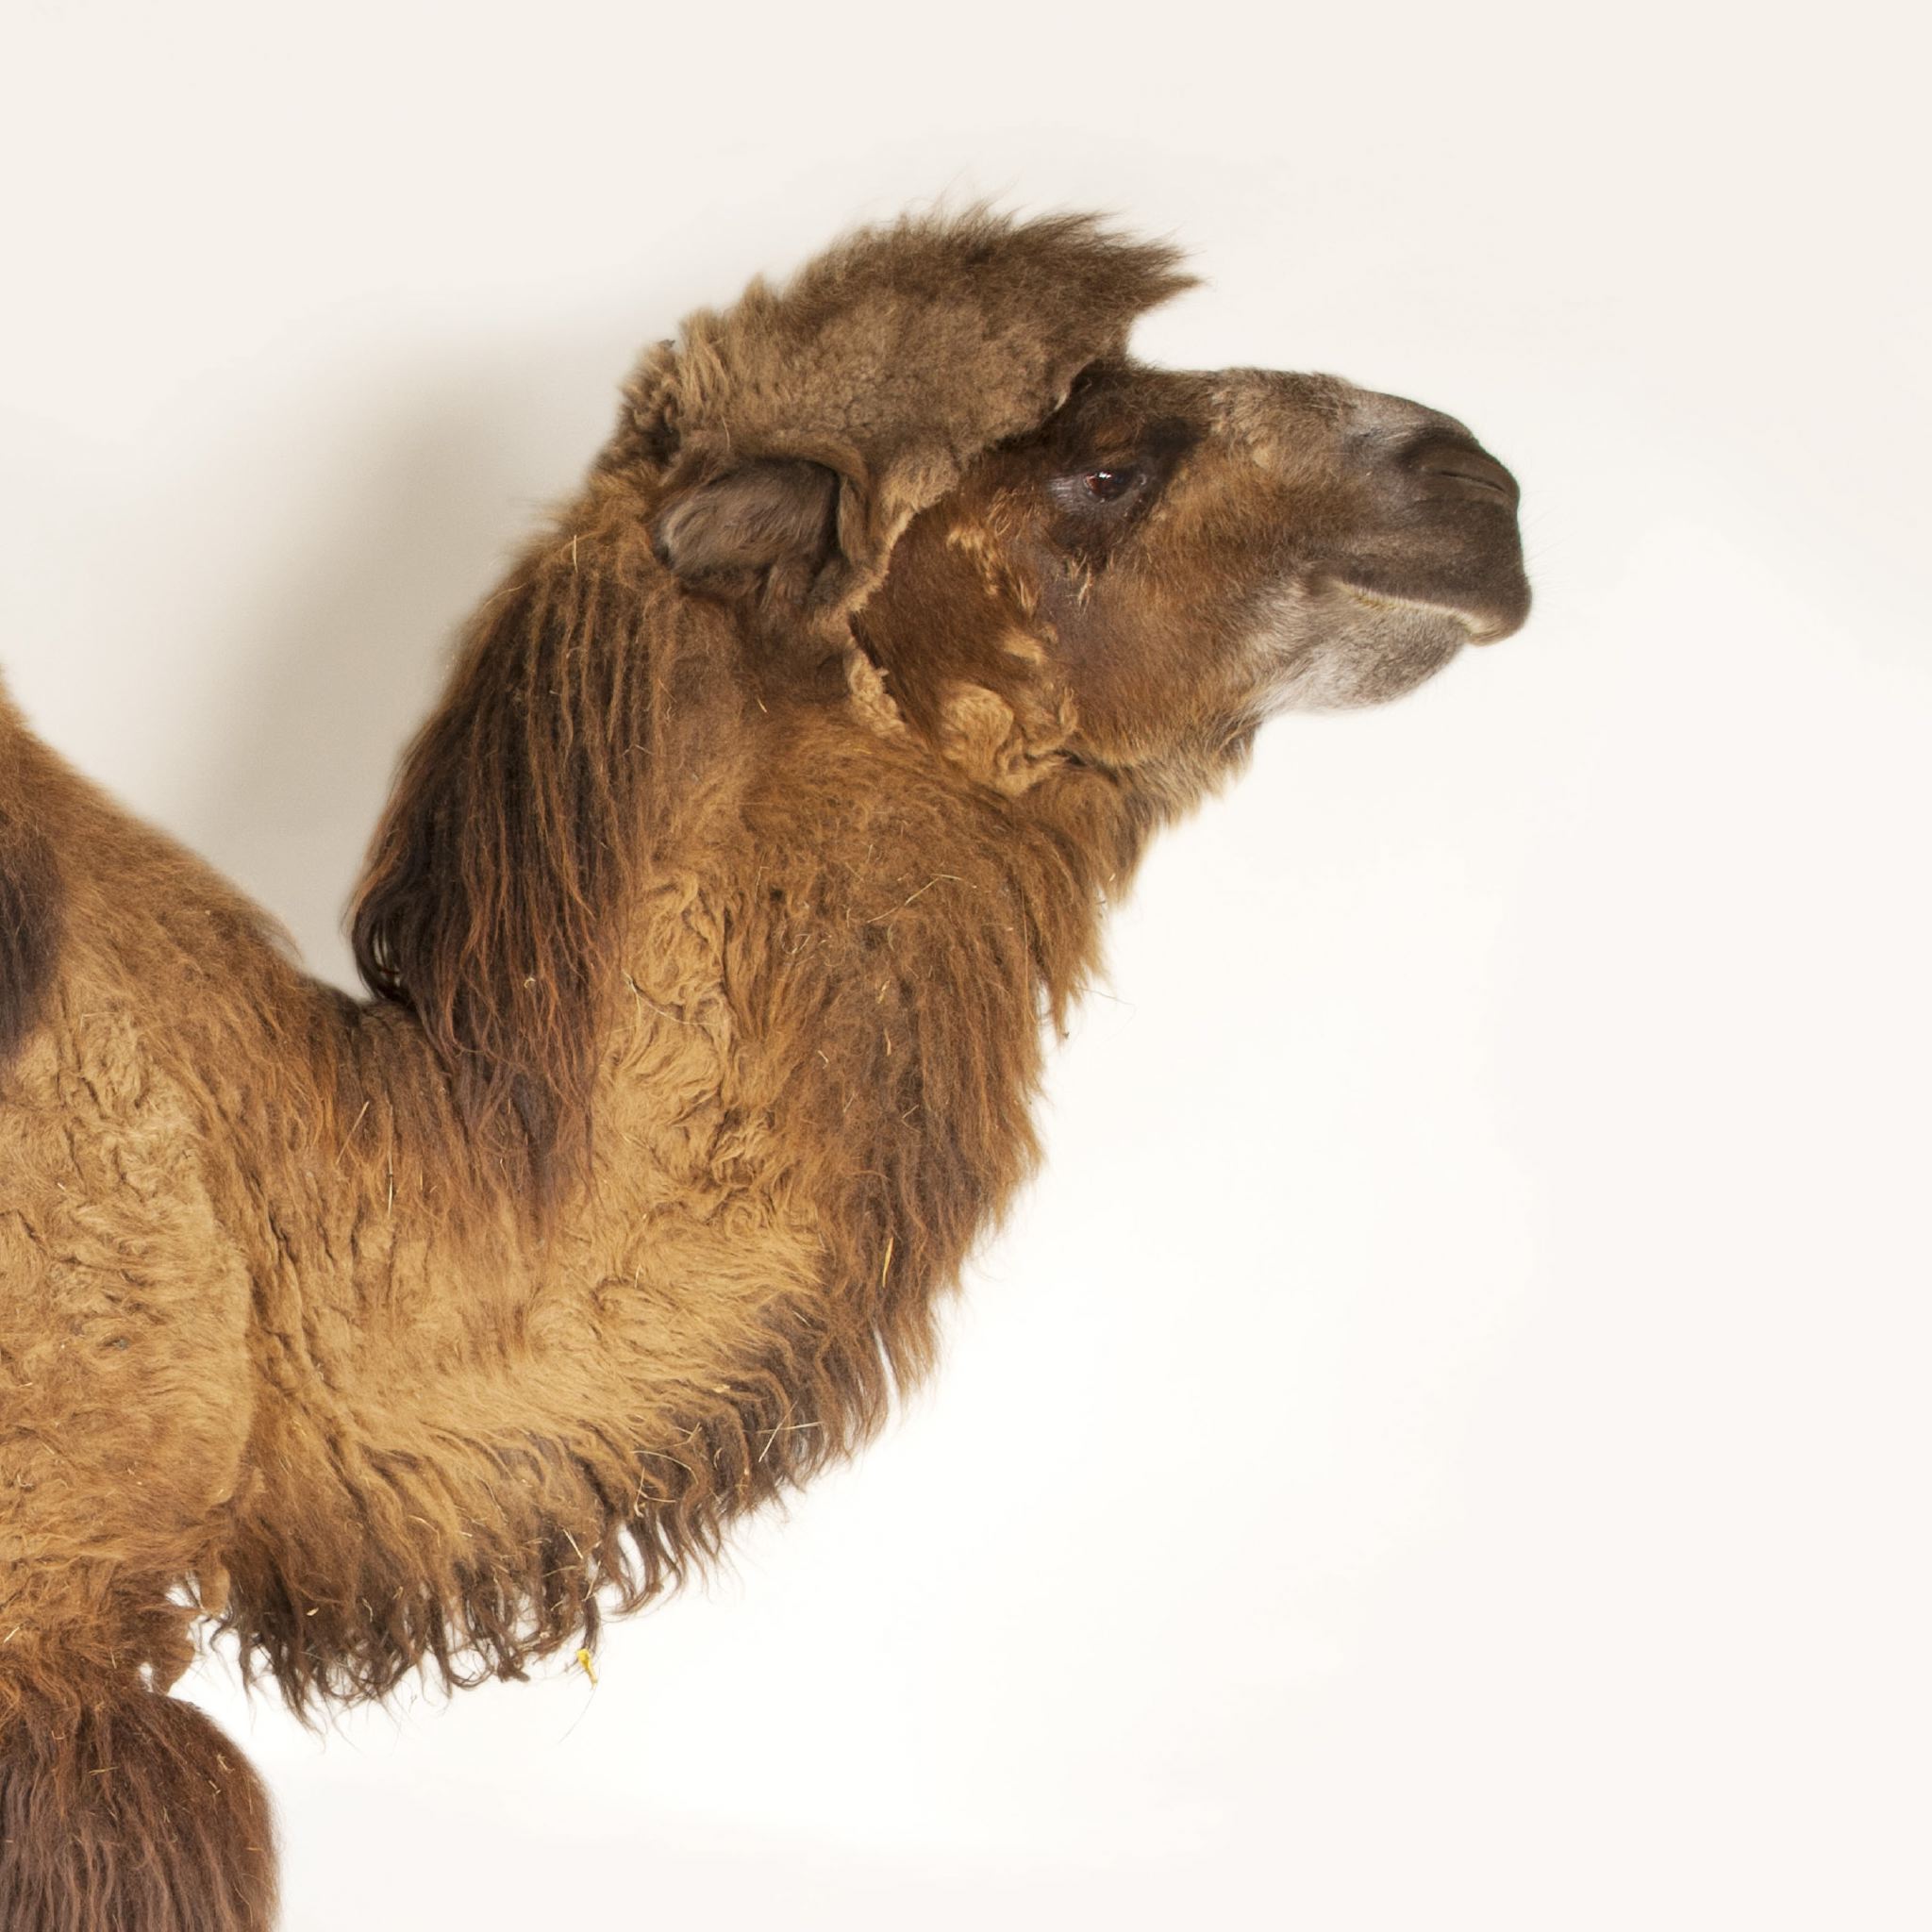 Bactrian Camel | National Geographic